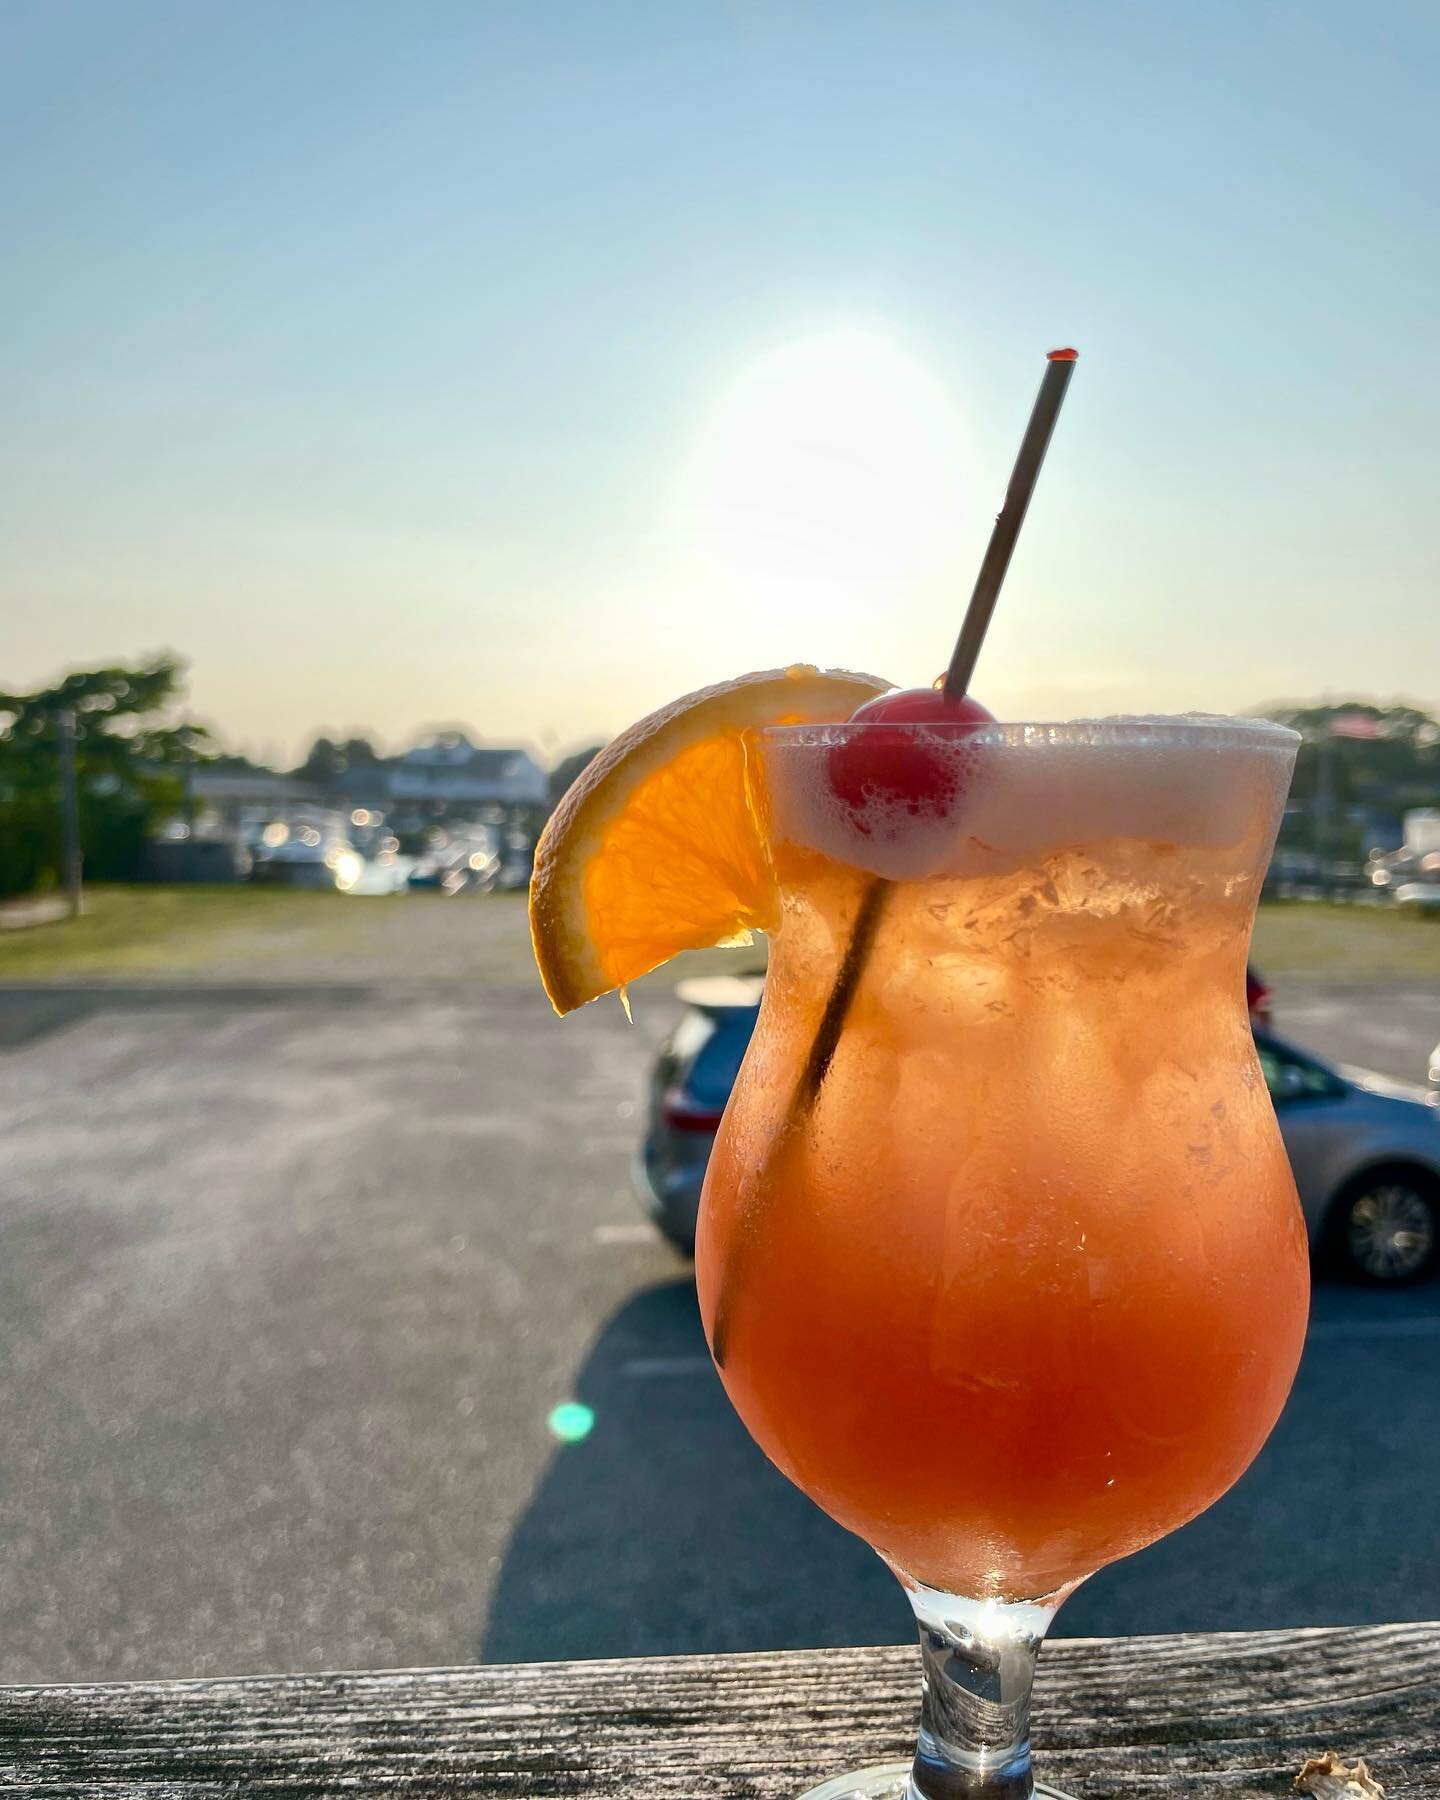 Happy Fourth of July weekend! #fourthofjulyweekend 

Our Snack Shack - Fins to Go - is now open for take out everything AND we are open for lunch too! Stop by for a REFRESHING cocktail or stop by to grab something tasty on your way to the beach - eit